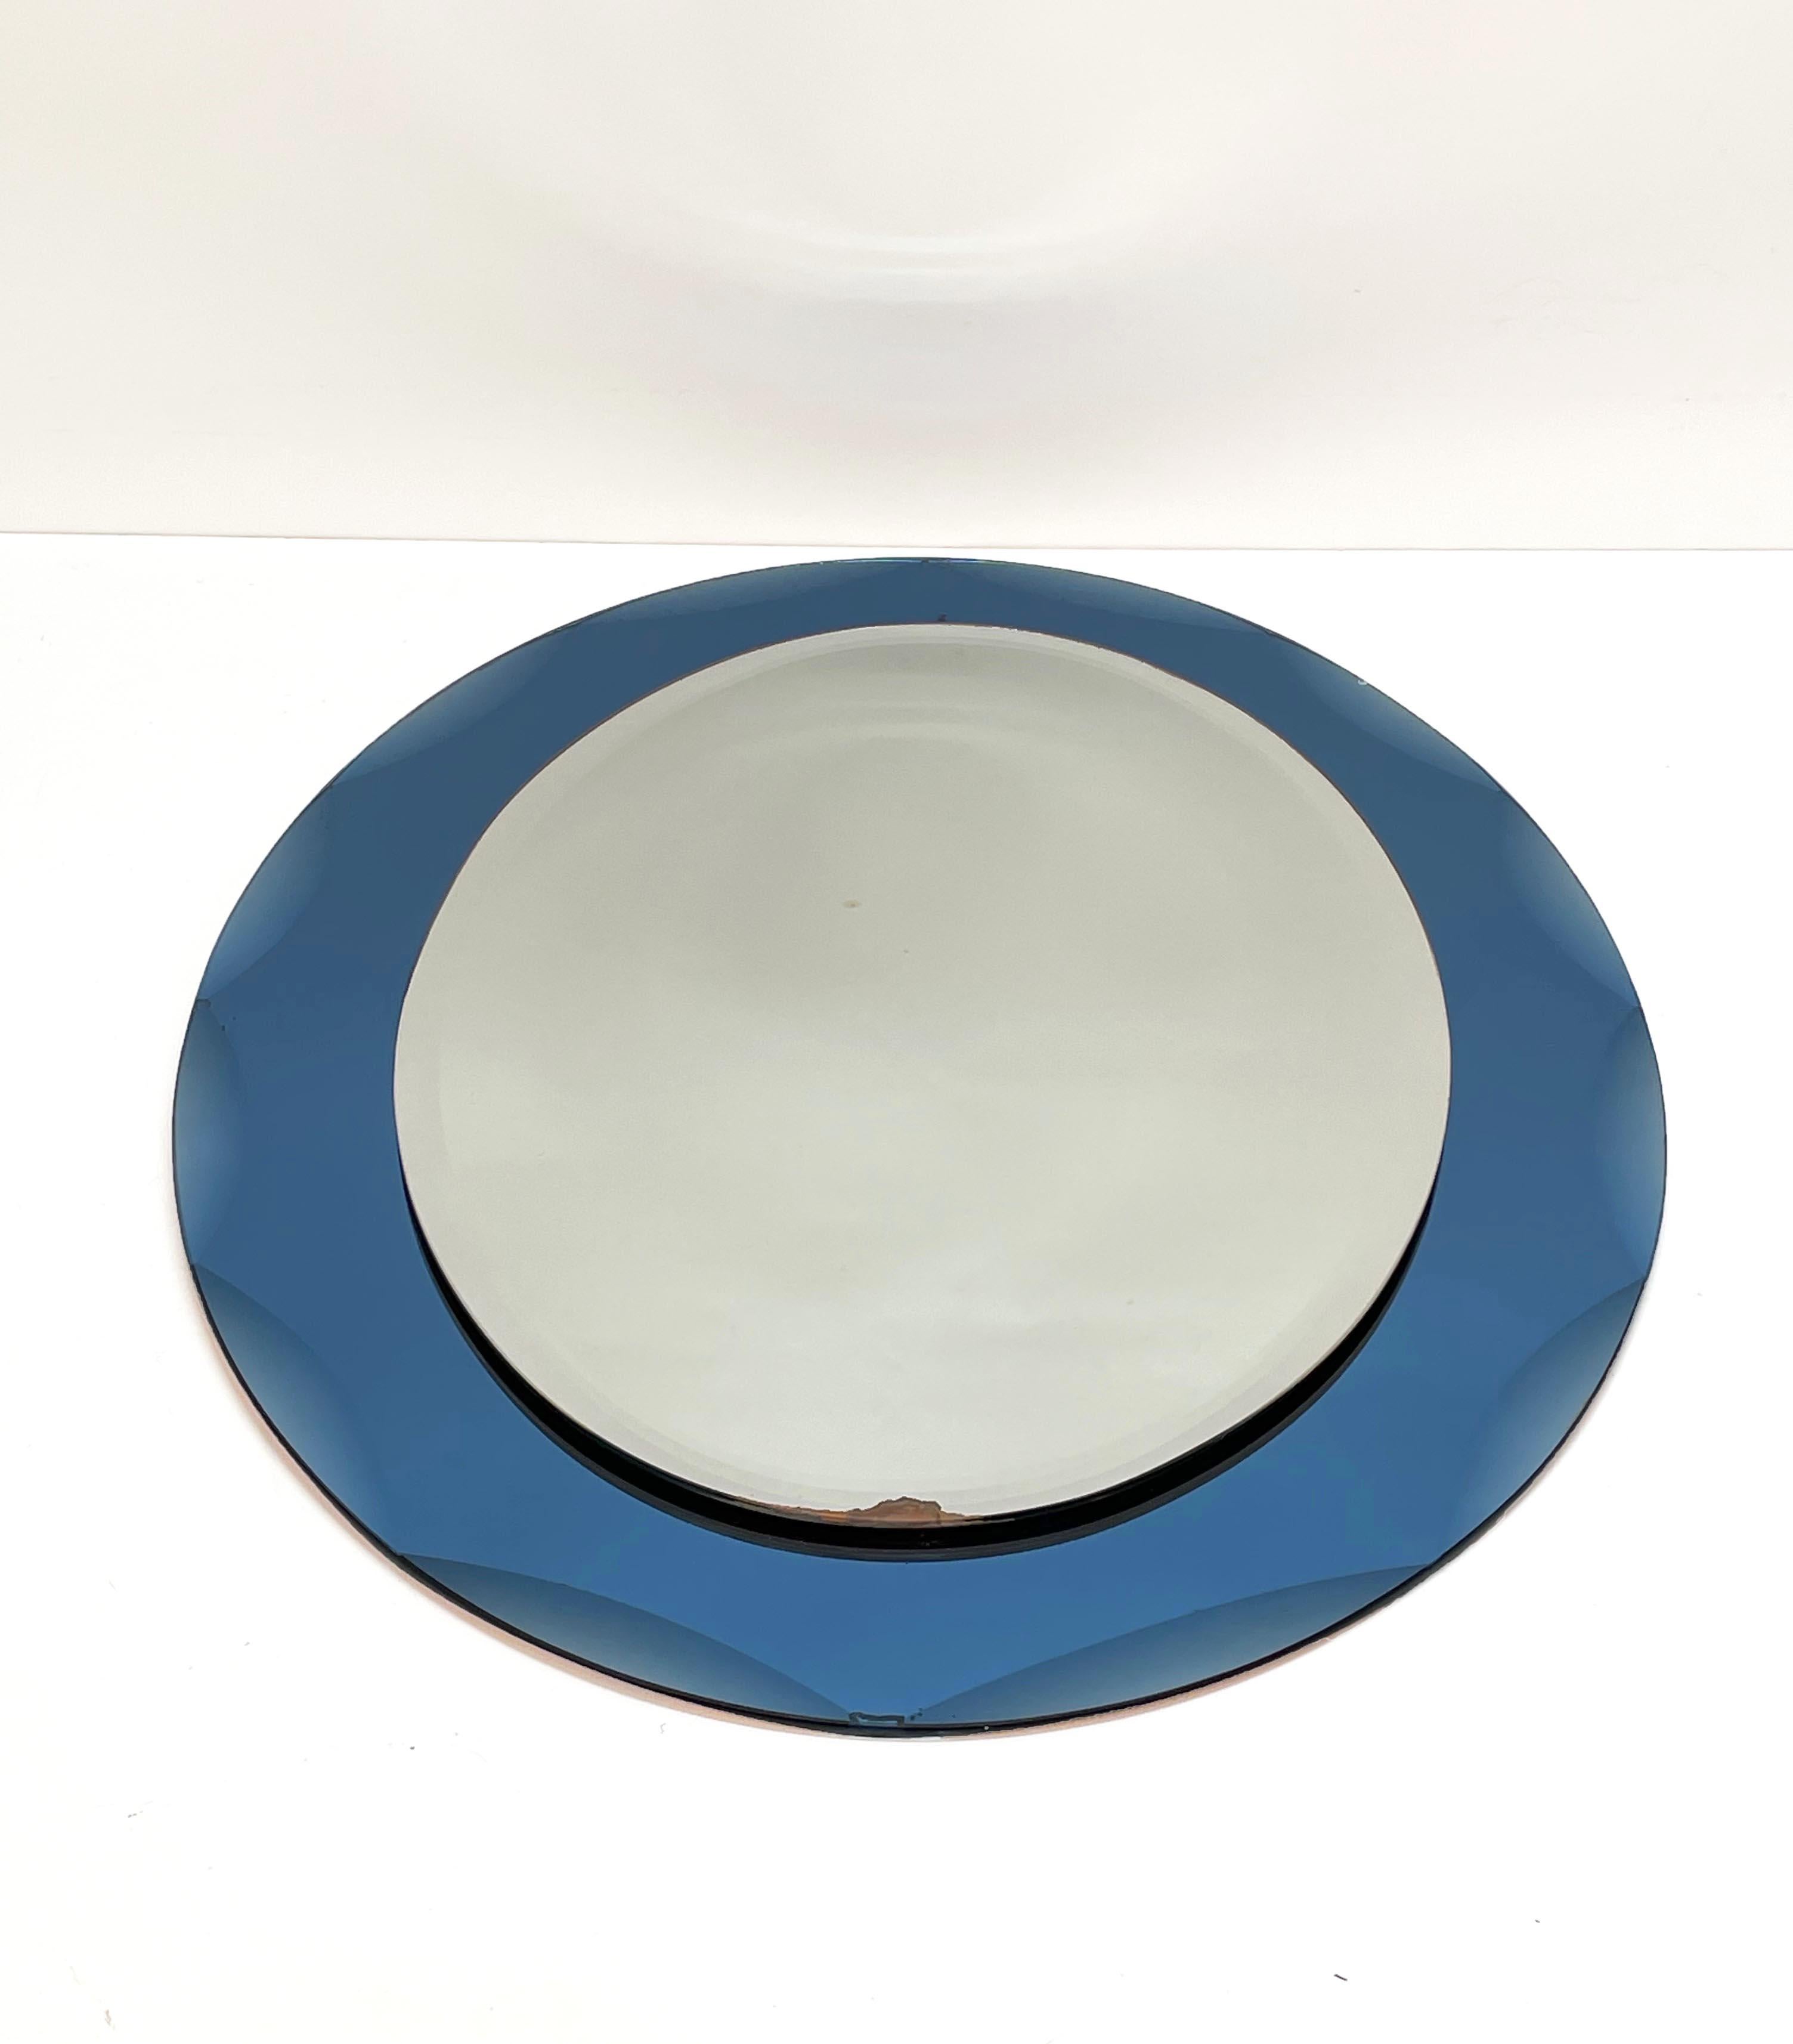 Mid-20th Century Midcentury Cristal Arte Italian Oval Mirror with Graven Blue Frame, 1960s For Sale